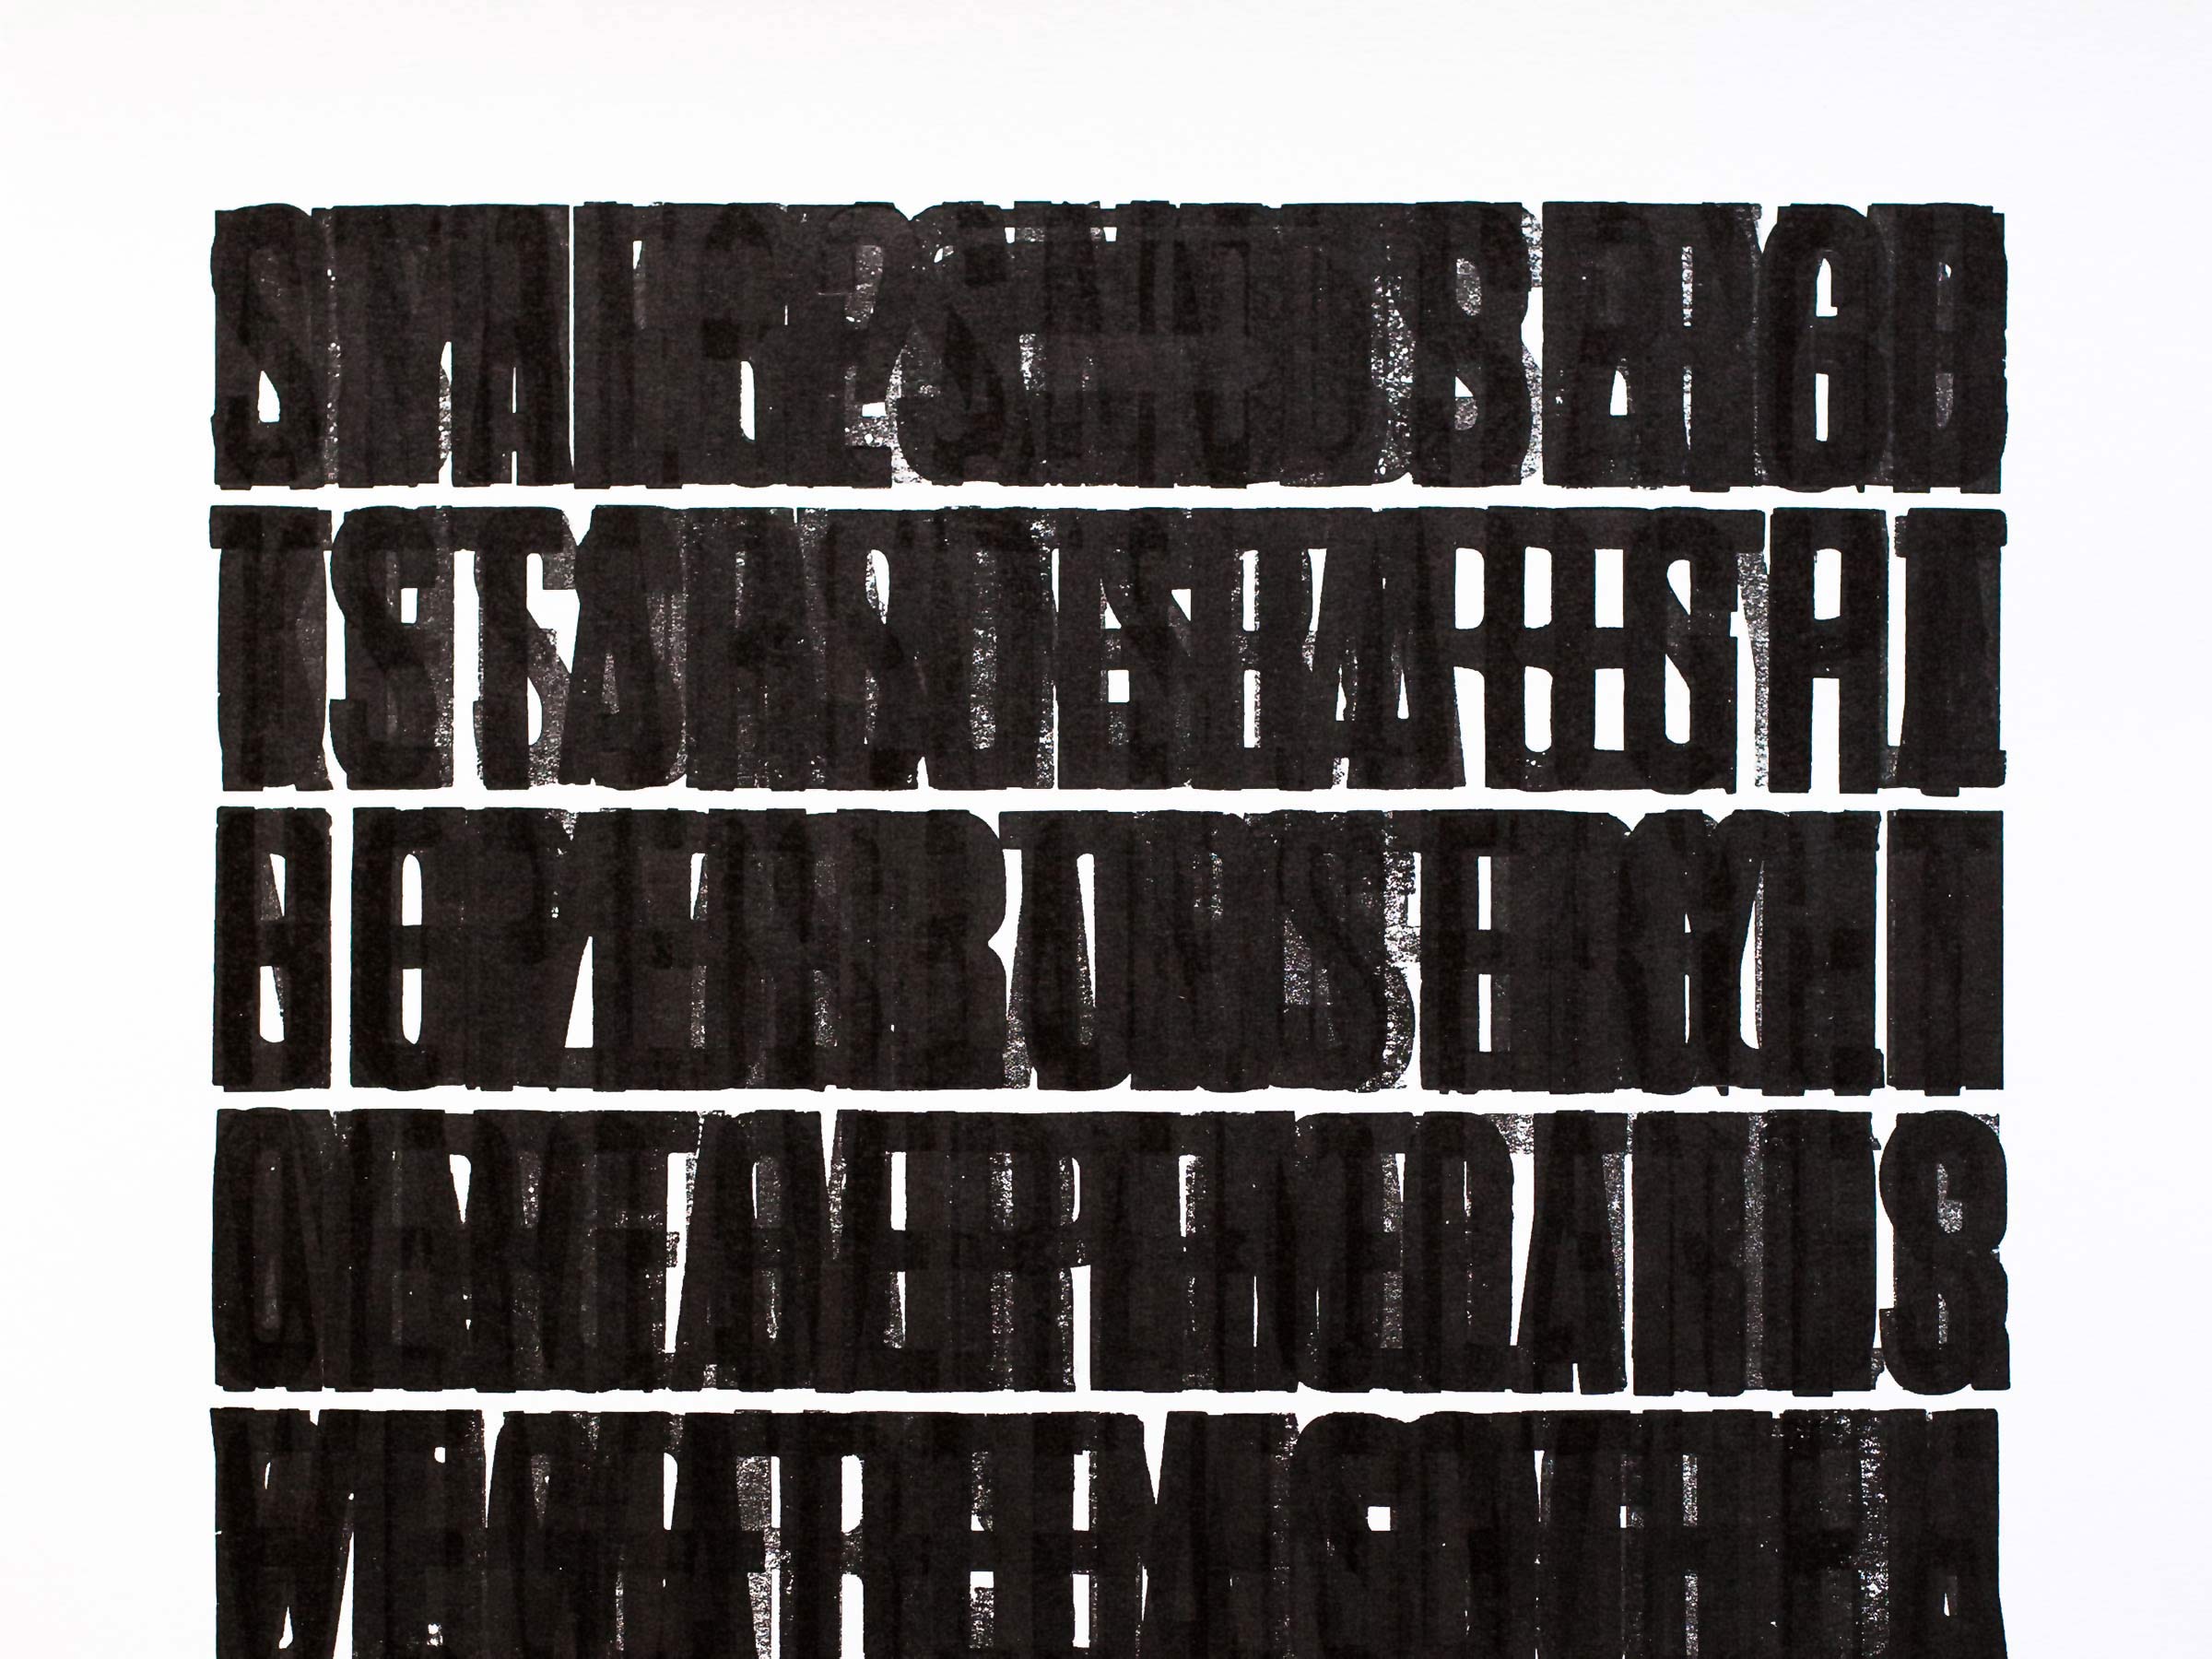 A letterpress print with all of the lyrics to the Star Spangled Banner overprinted onto themselves in dense black bars